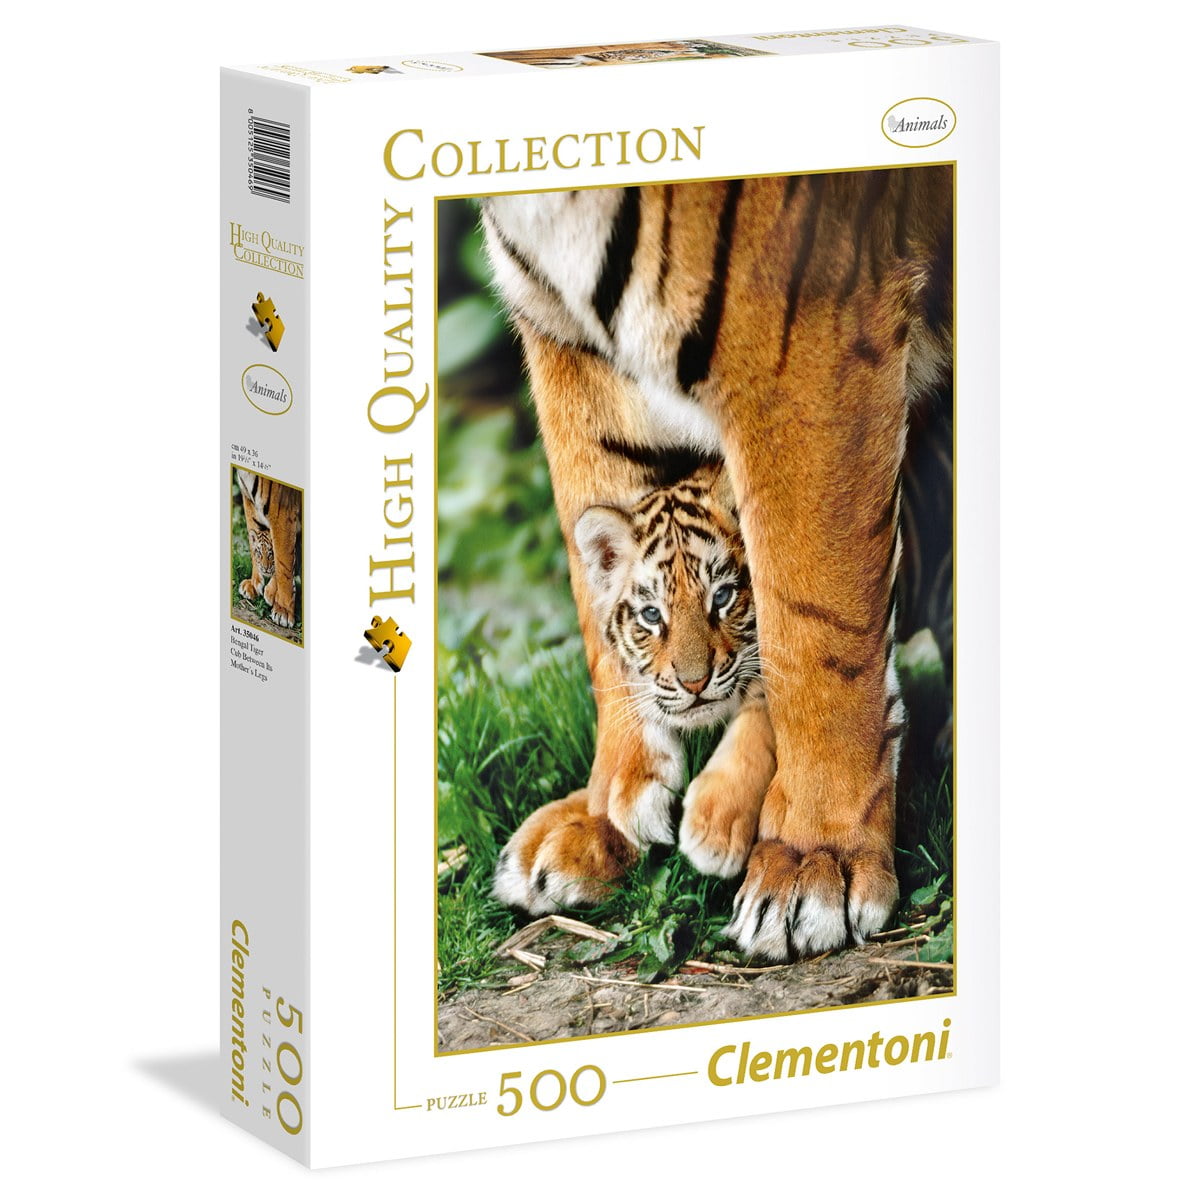 Clementoni Tiger High Quality Jigsaw Puzzle 1500 Pieces 